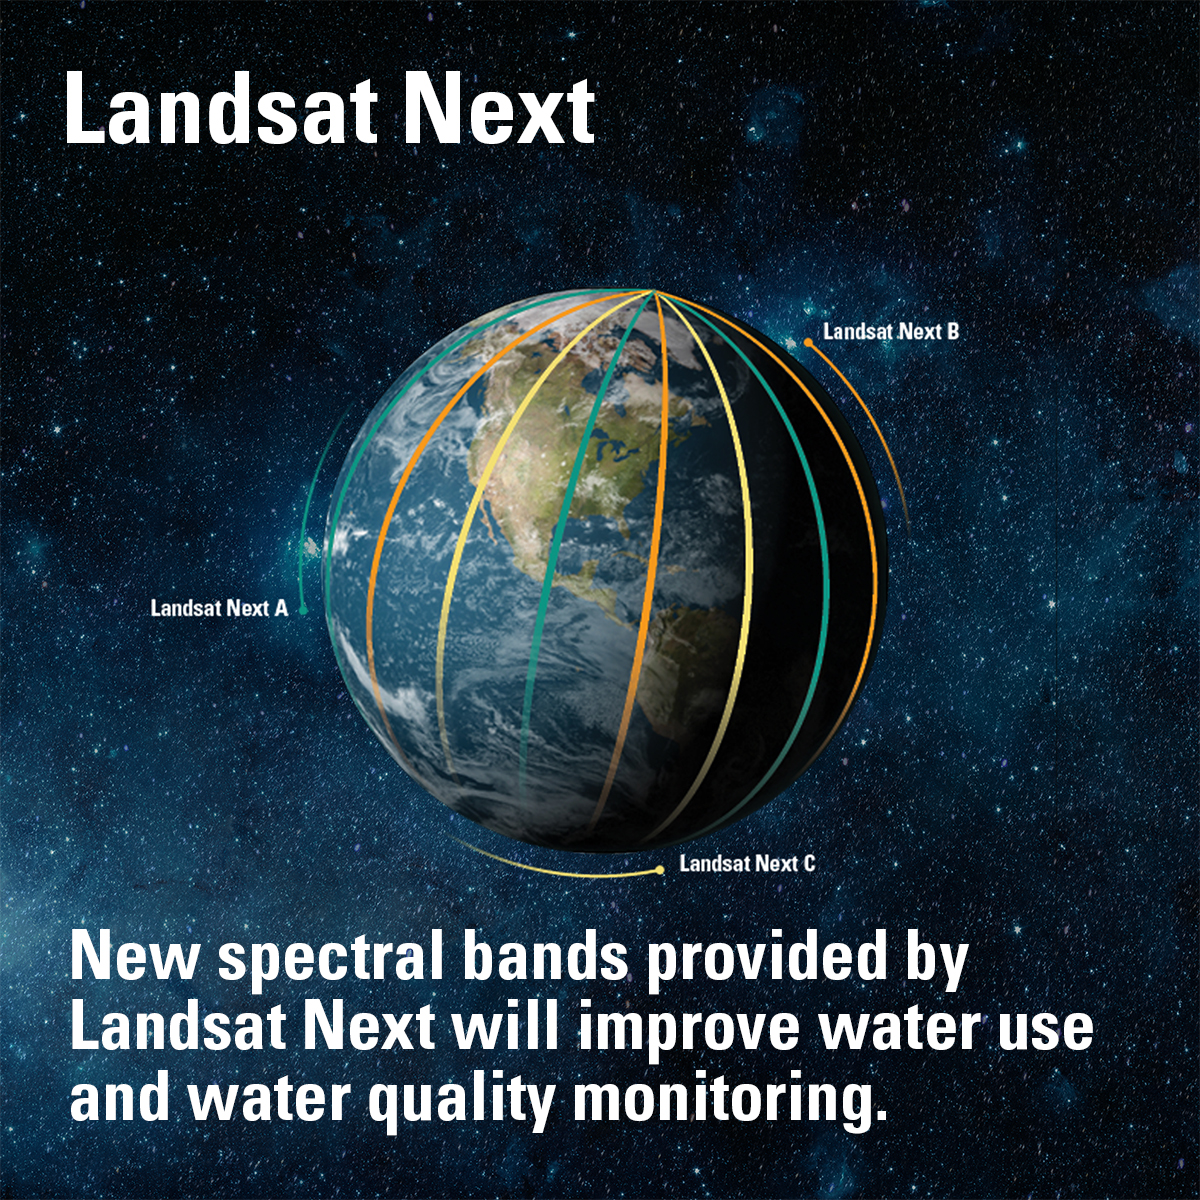 Let #WorldWaterDay be a reminder to acknowledge the role #EarthObservationSatellites play in monitoring valuable water resources. #LandsatNext will include new and enhanced capabilities that will improve water management and conservation. Learn more here: ow.ly/Un2t50QZU2g